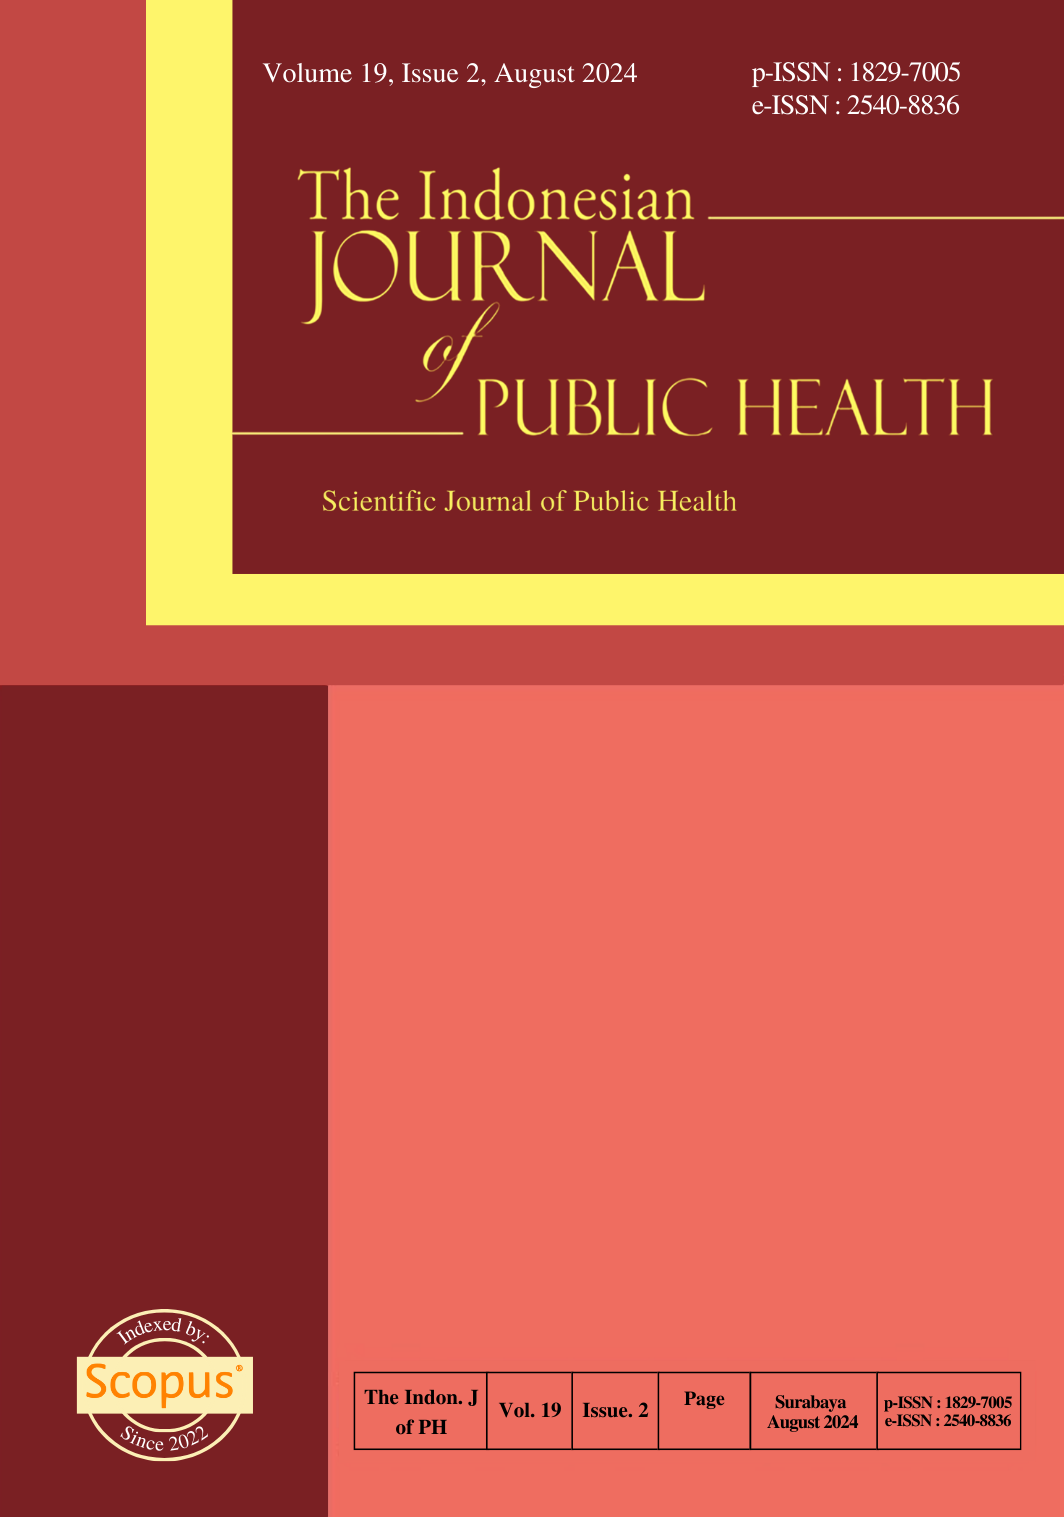 						View Vol. 19 No. 2 (2024): THE INDONESIAN JOURNAL OF PUBLIC HEALTH : IN PRESS
					